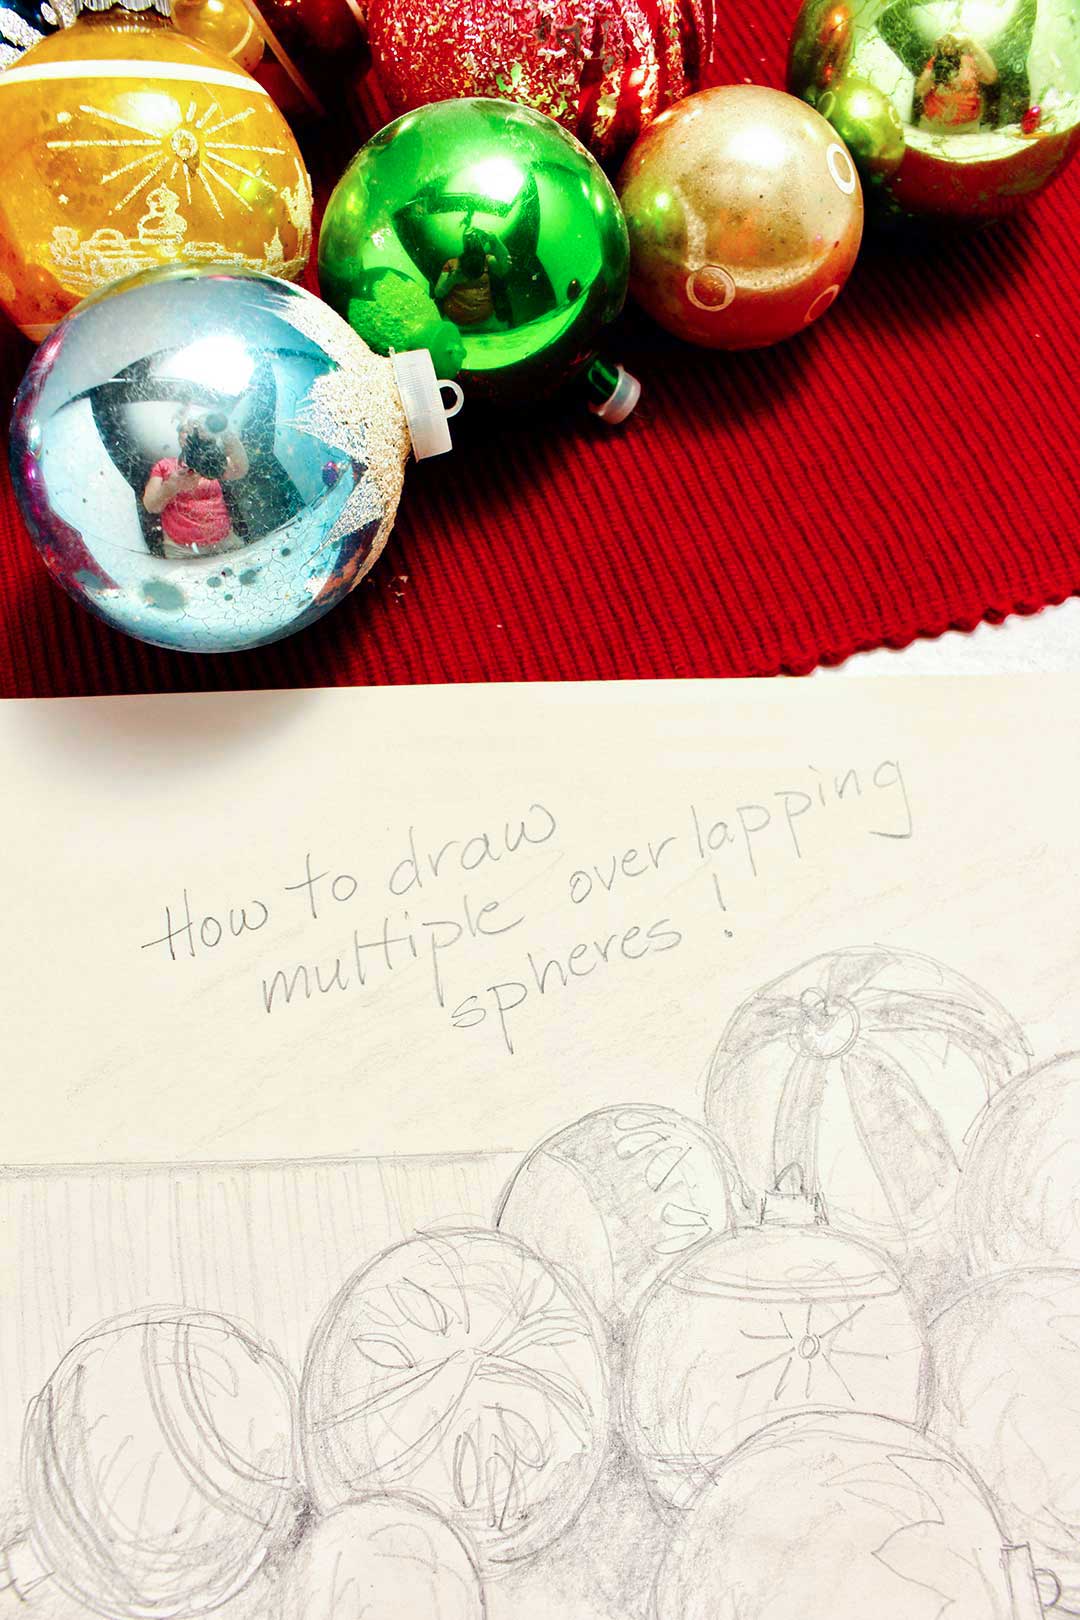 Close up view of finished Christmas ornament drawing with words "How to draw multiple overlapping spheres!" written on it.